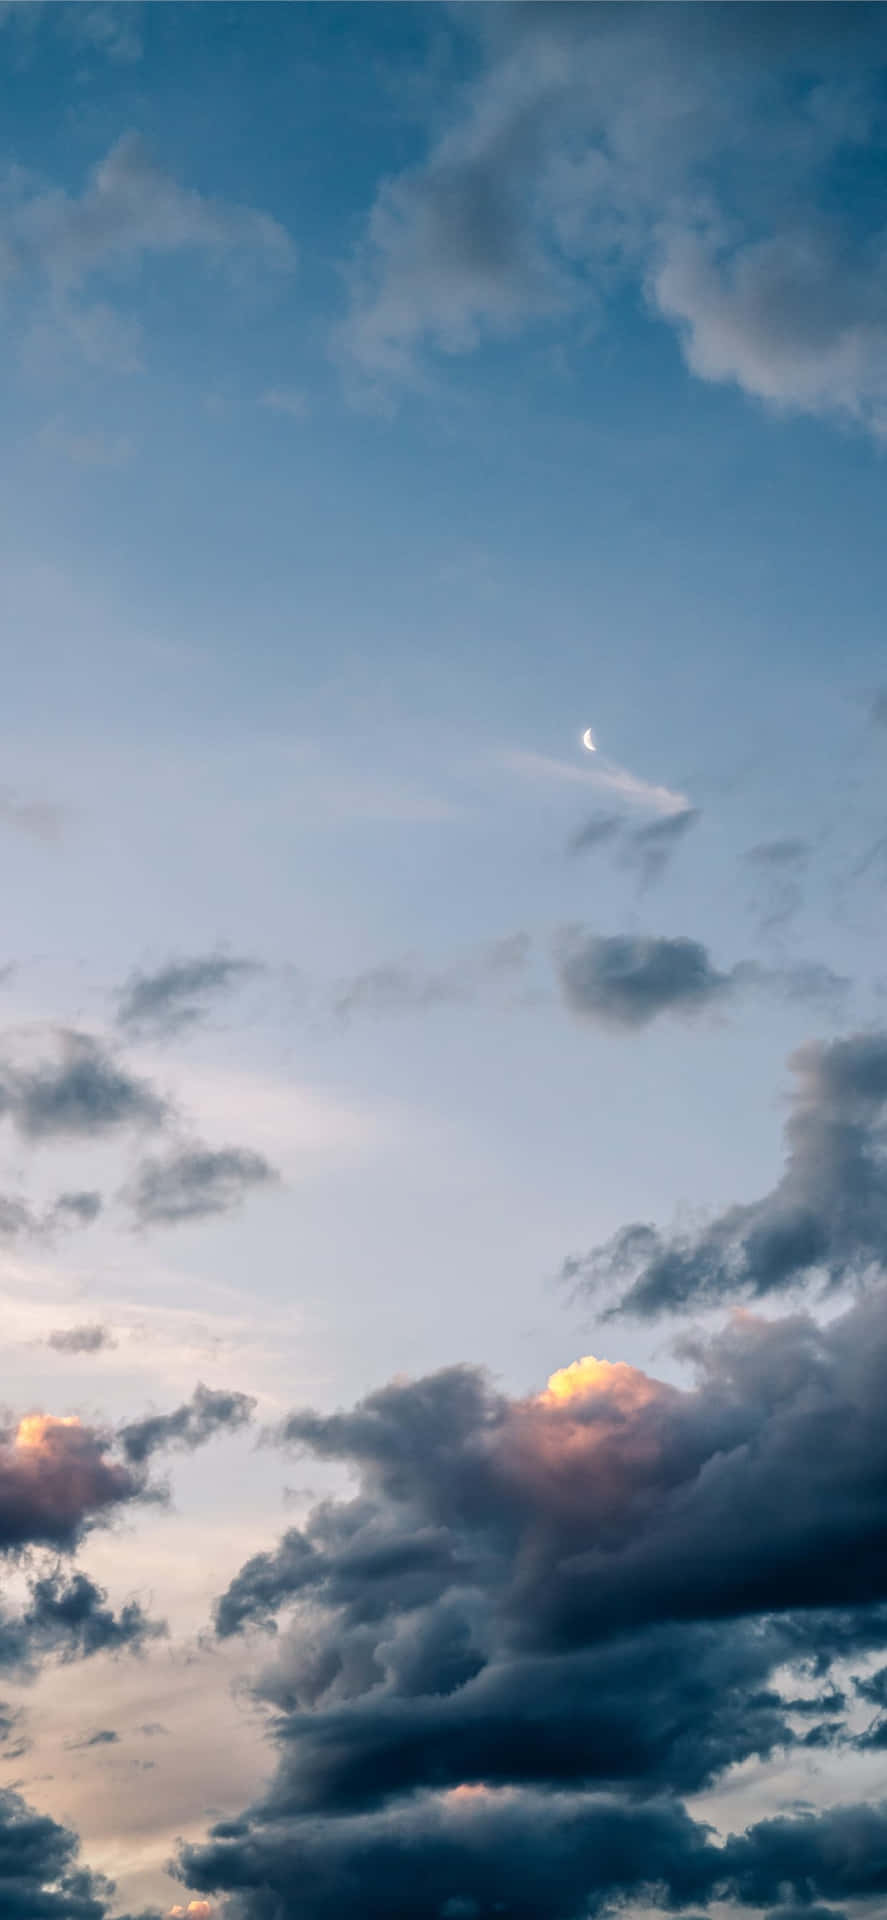 A Moon And Clouds In The Sky Wallpaper